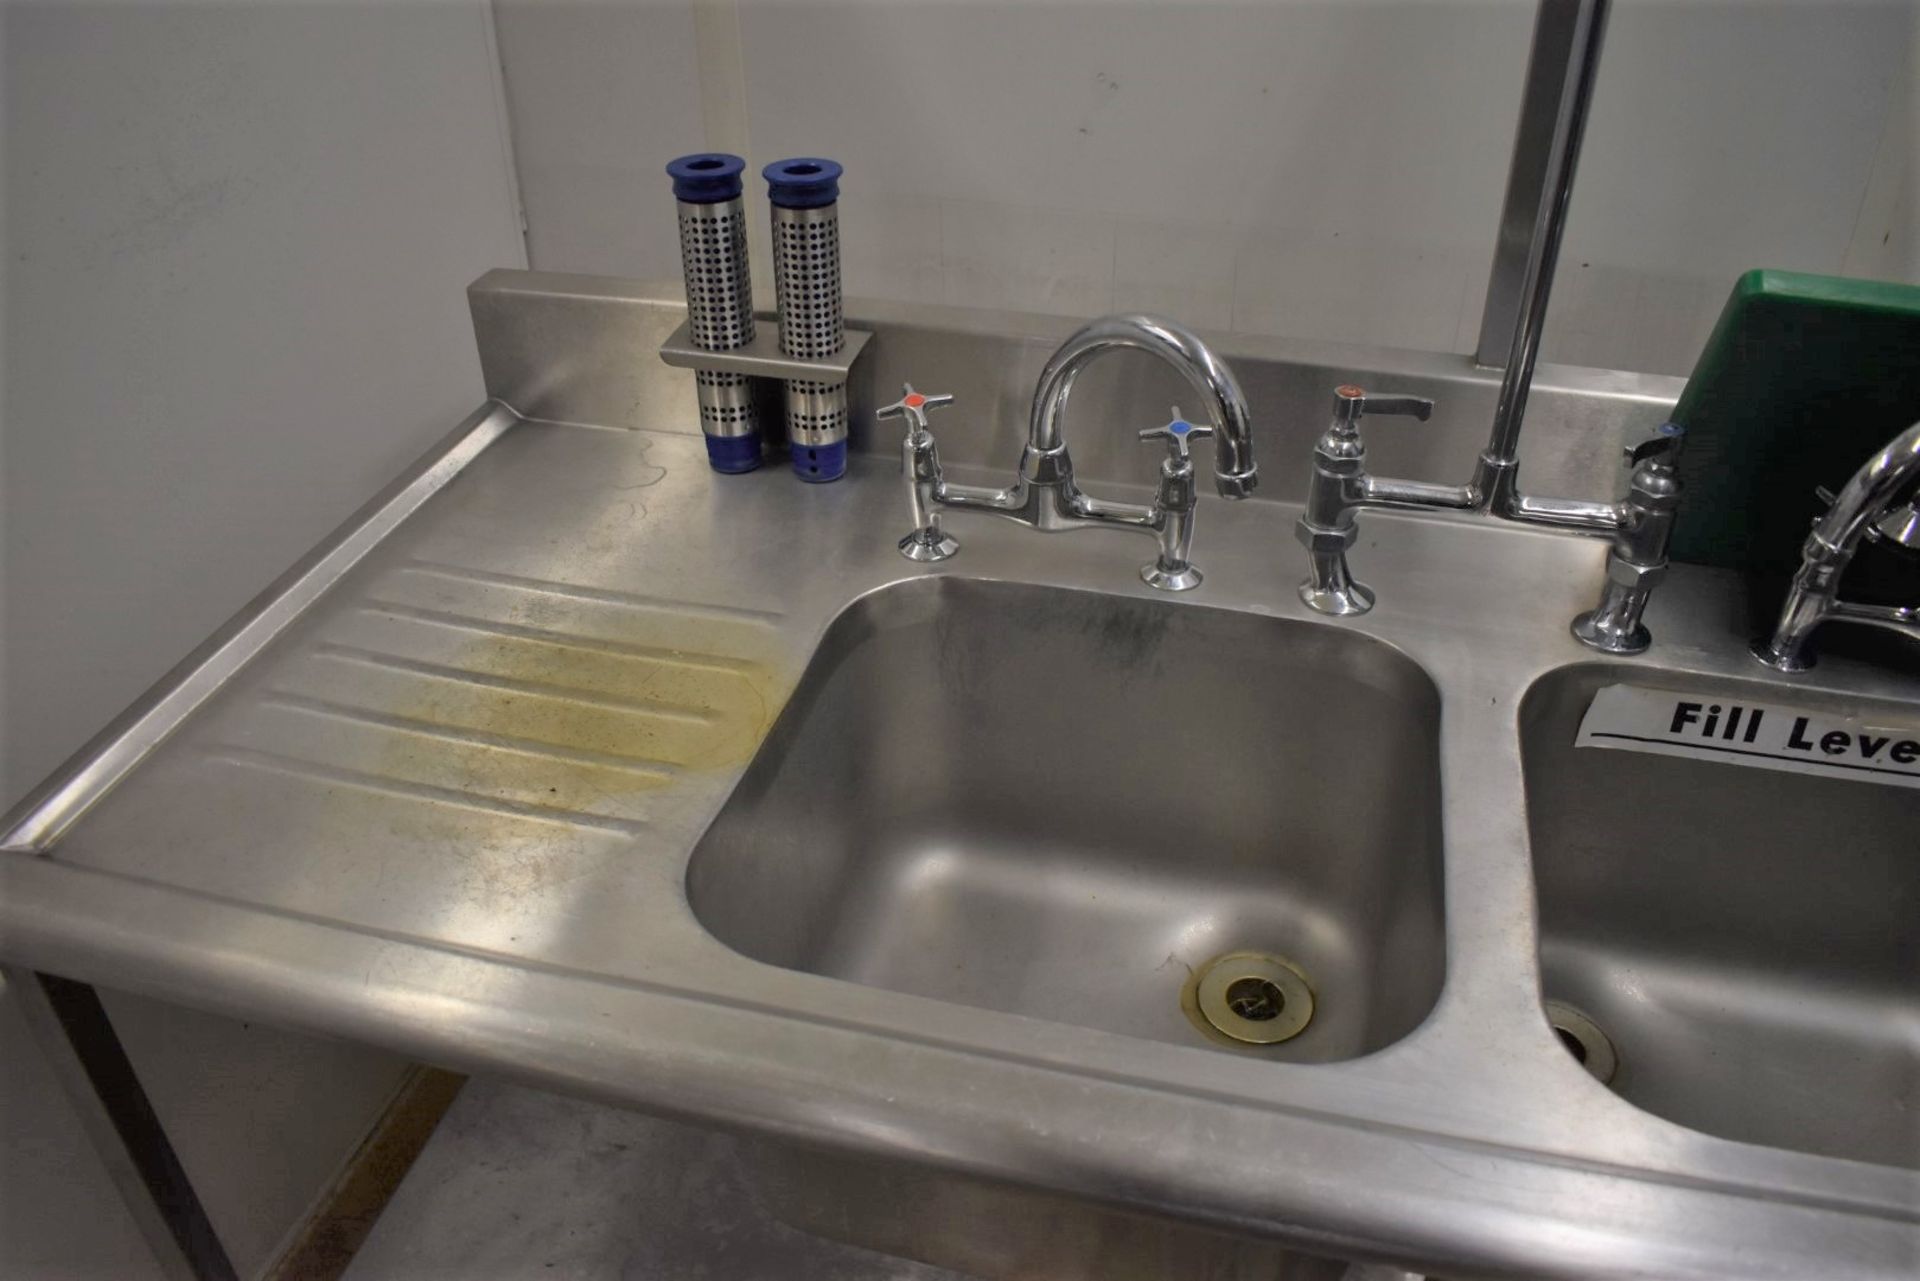 1 x Large Stainless Steel Wash Unit With Triple Sink Basins, Hose Rinser Tap, Mixer Taps, Drainer, - Image 2 of 6